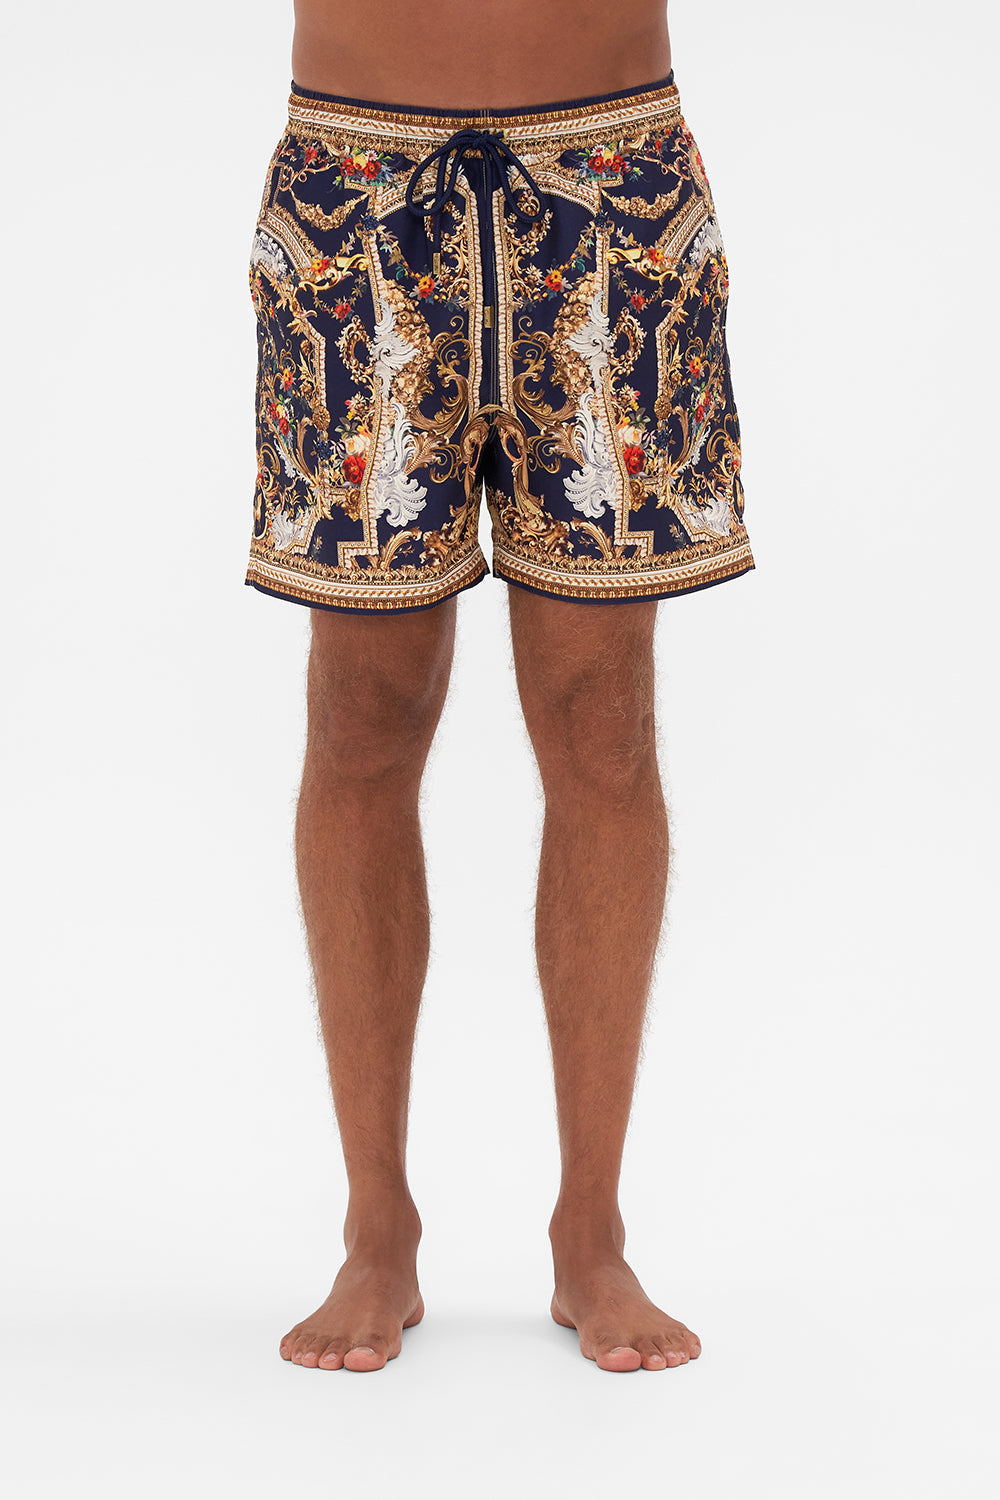 Crop view of model wearing Hotel Franks by CAMILLA mens boardshort in Venice Vignette print